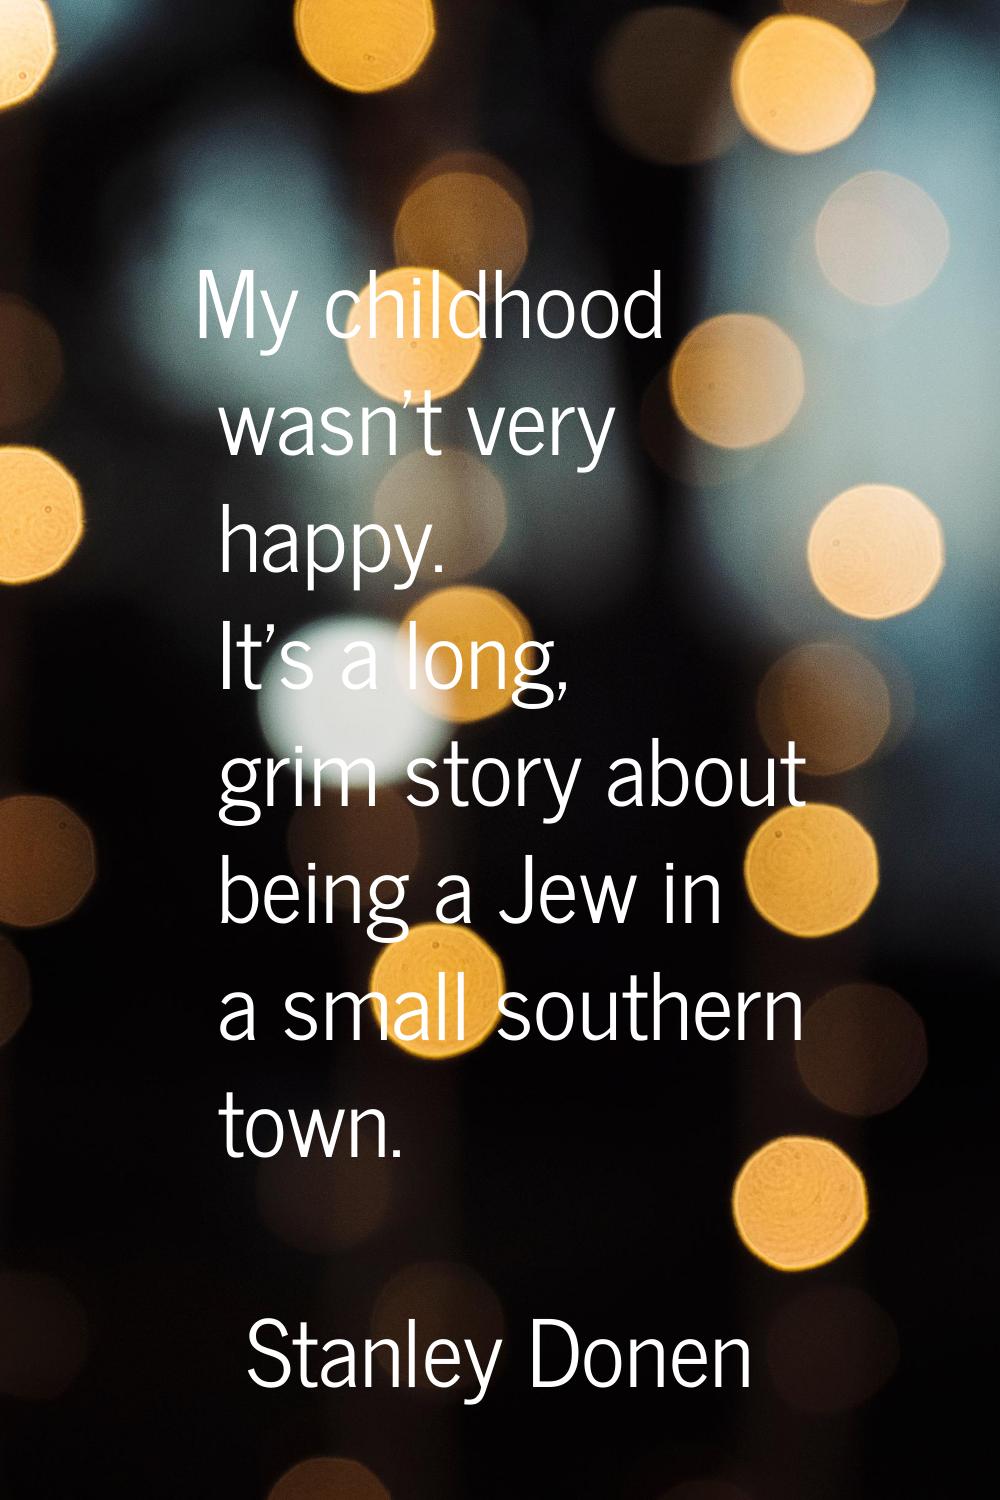 My childhood wasn't very happy. It's a long, grim story about being a Jew in a small southern town.